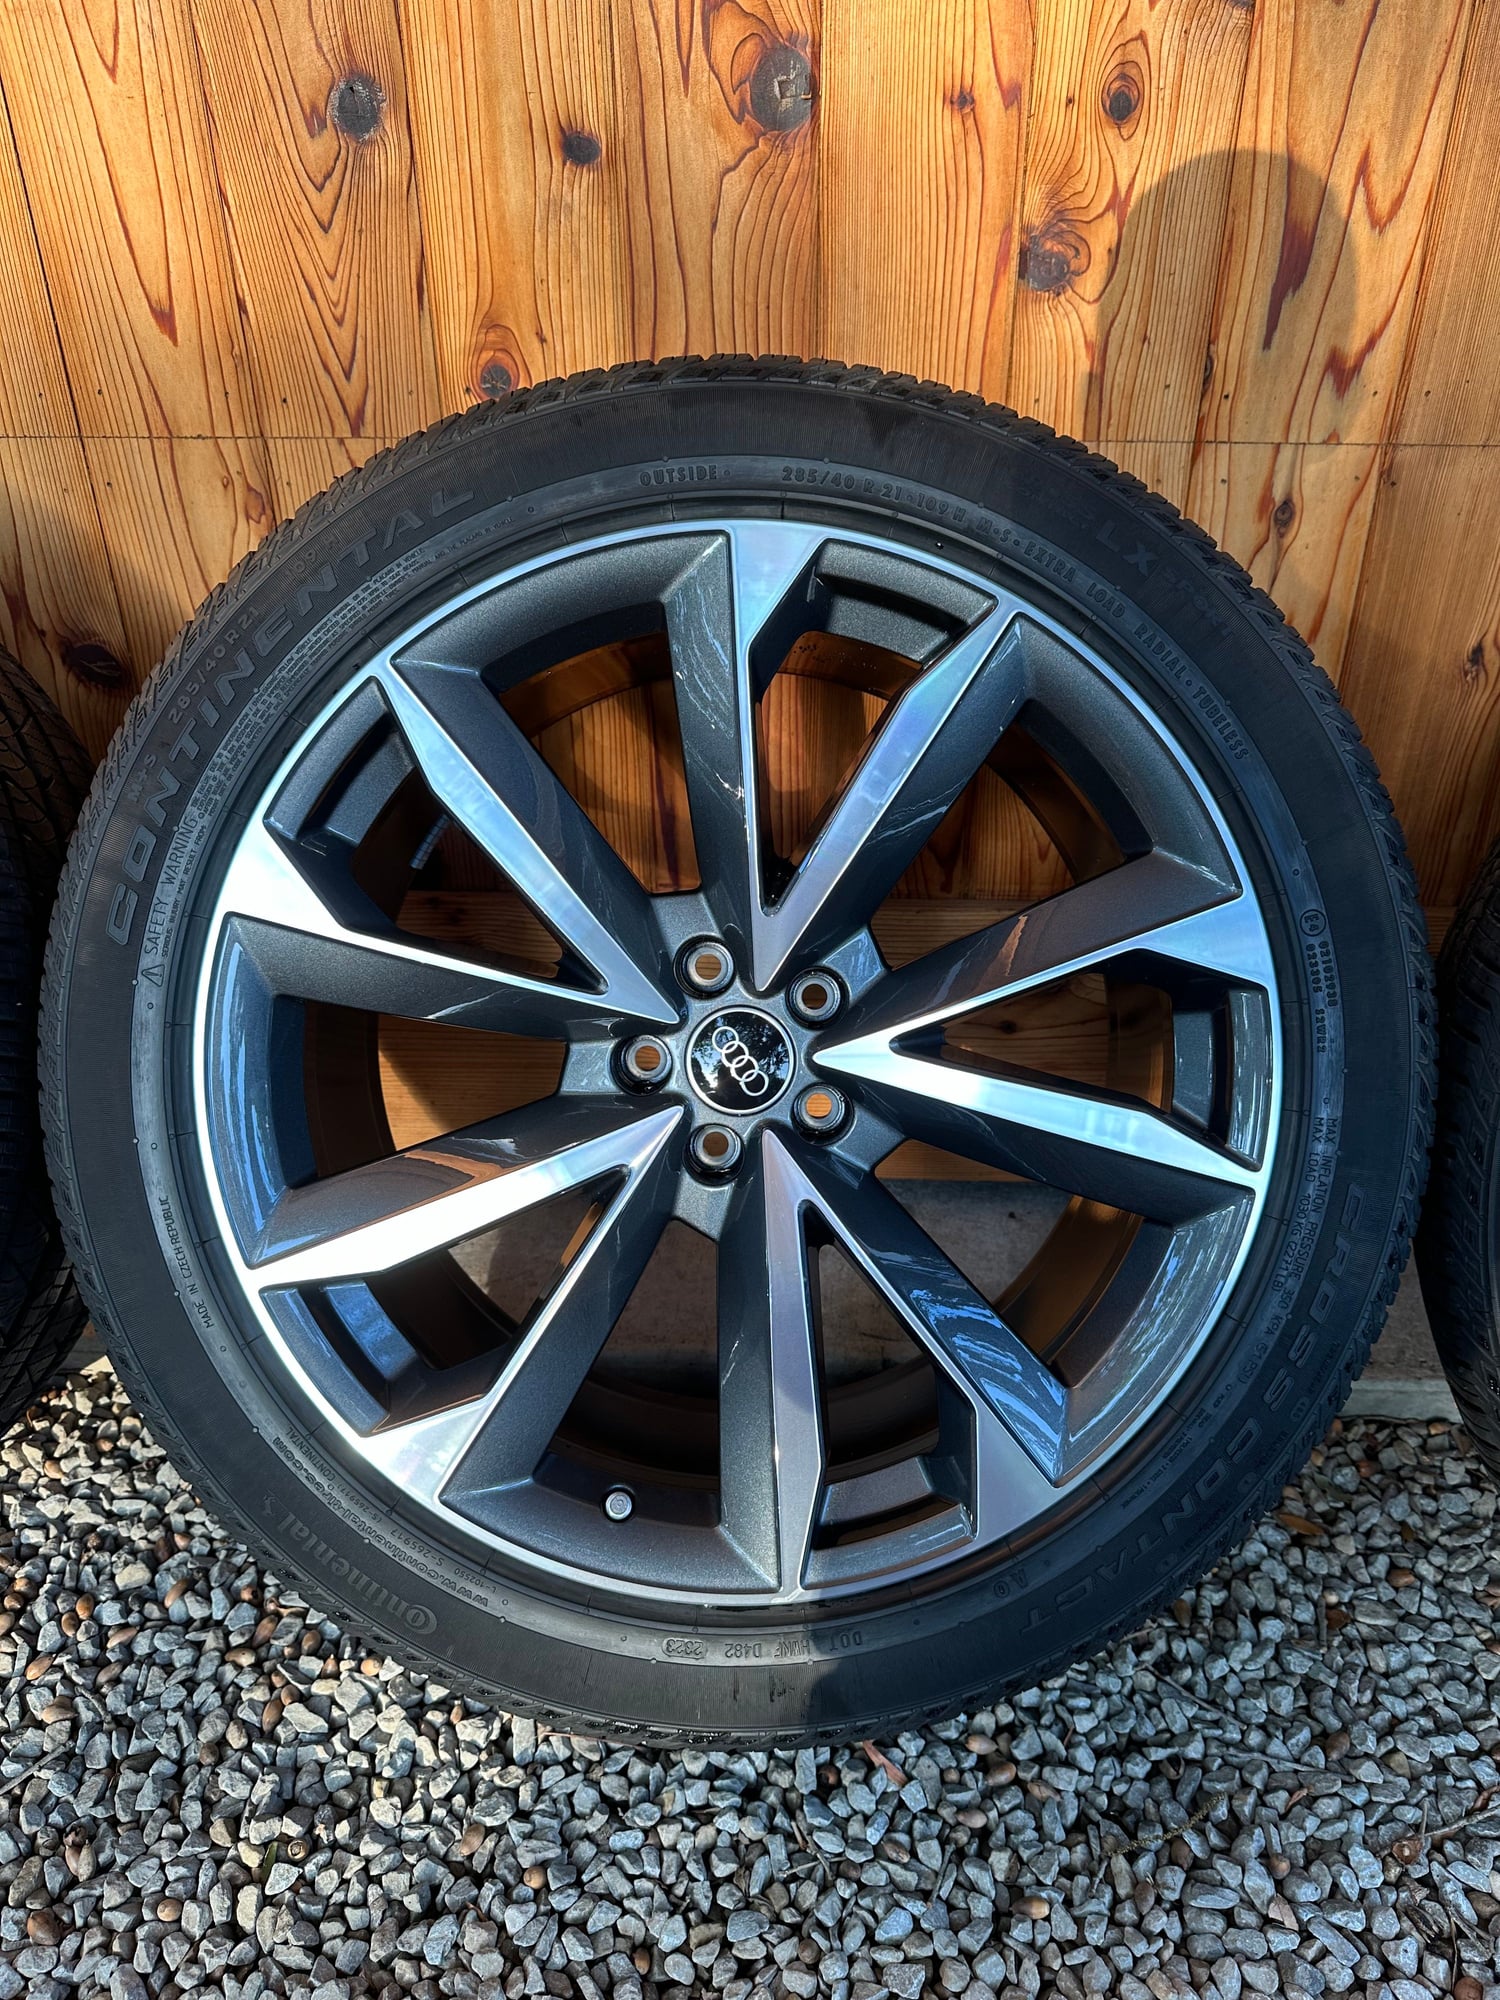 Wheels and Tires/Axles - 21 x 9.5" ET31 5 V Double Spoke SQ7 Wheels and Tires - 165 Miles Only! Houston, Texas - Used - -1 to 2025  All Models - -1 to 2025  All Models - Houston, TX 77018, United States